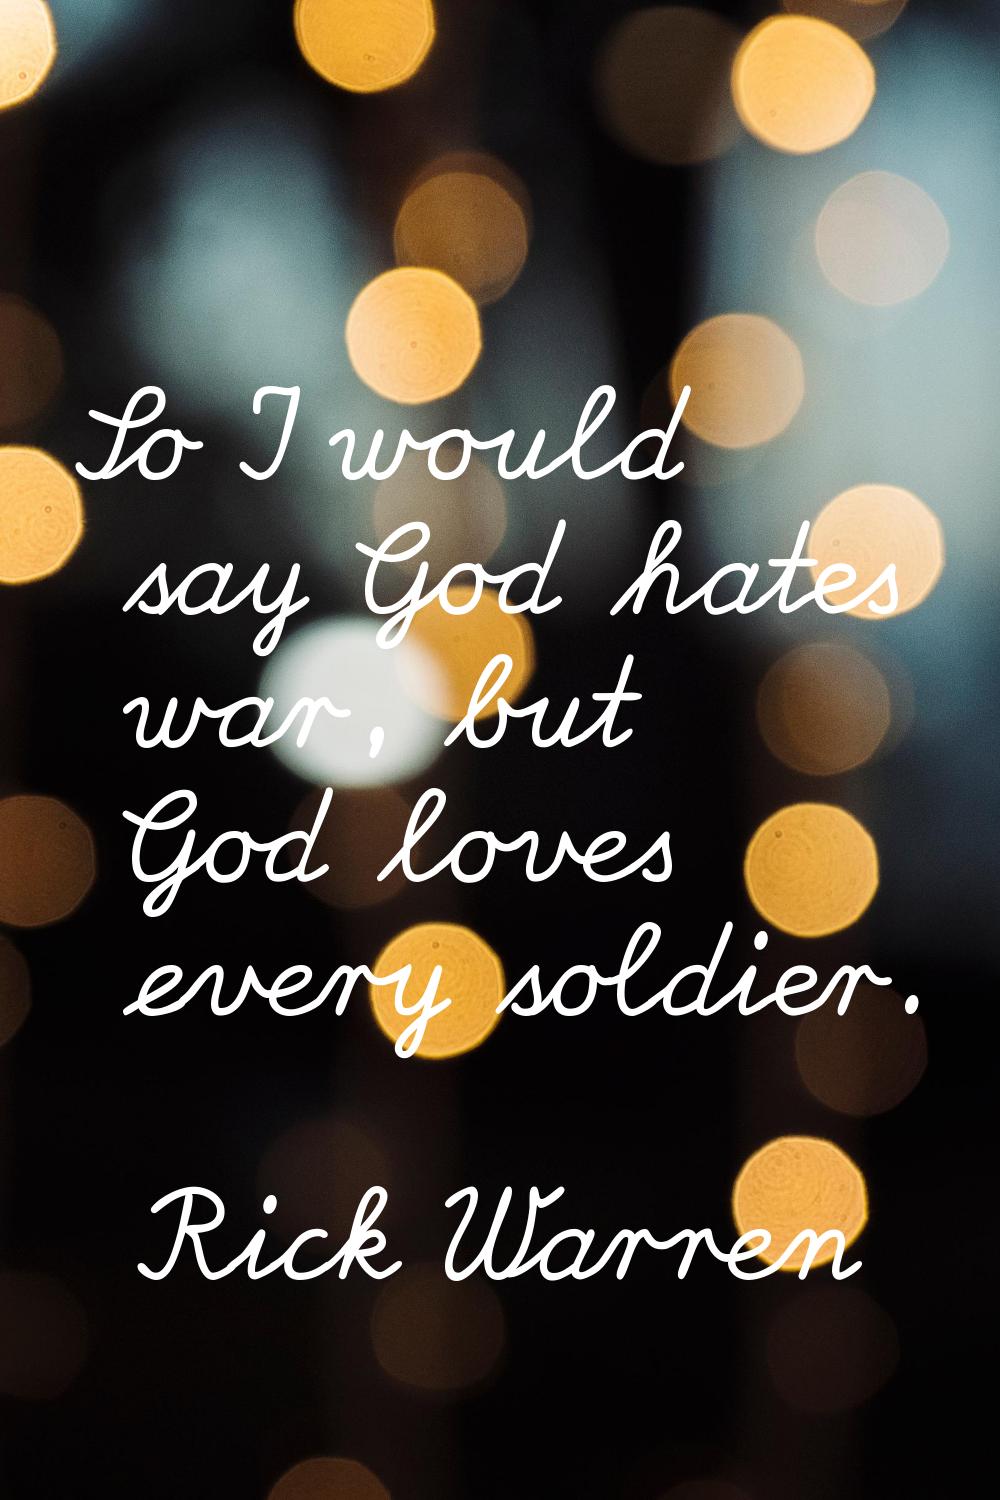 So I would say God hates war, but God loves every soldier.